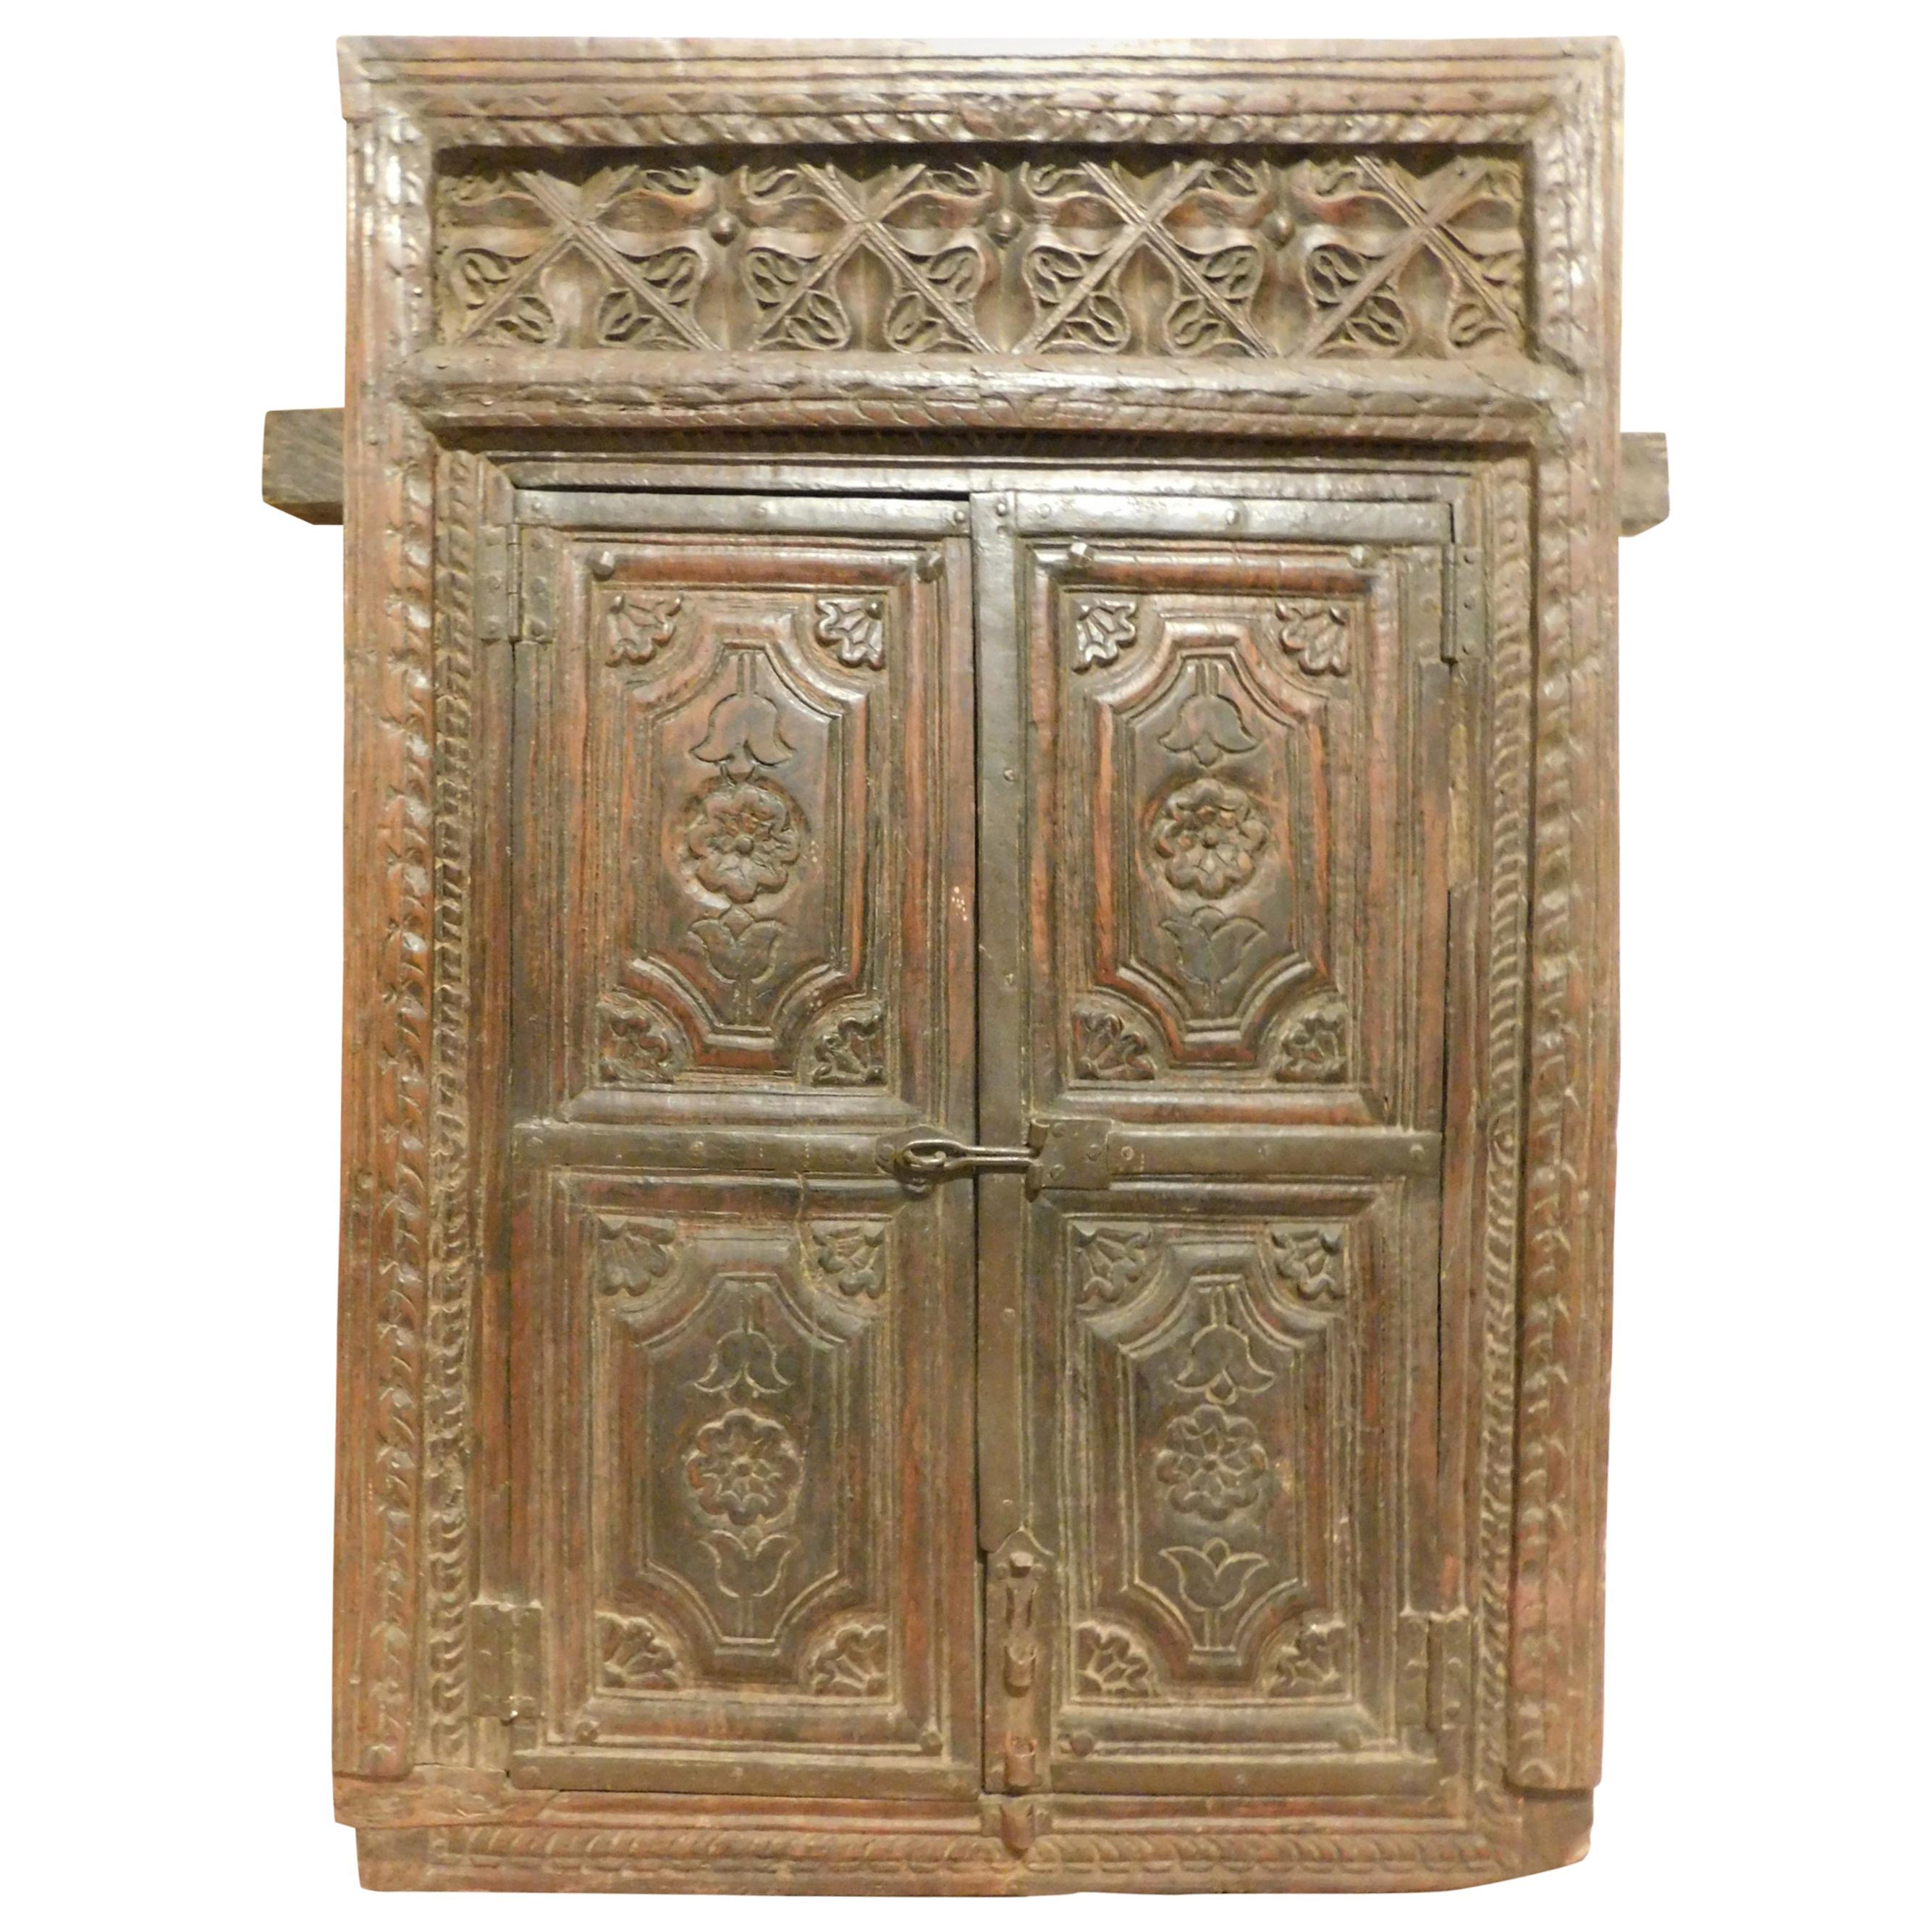 Antique Wall Cabinet, Placard, in Dark Wood Very Carved by Hand, India, 1800